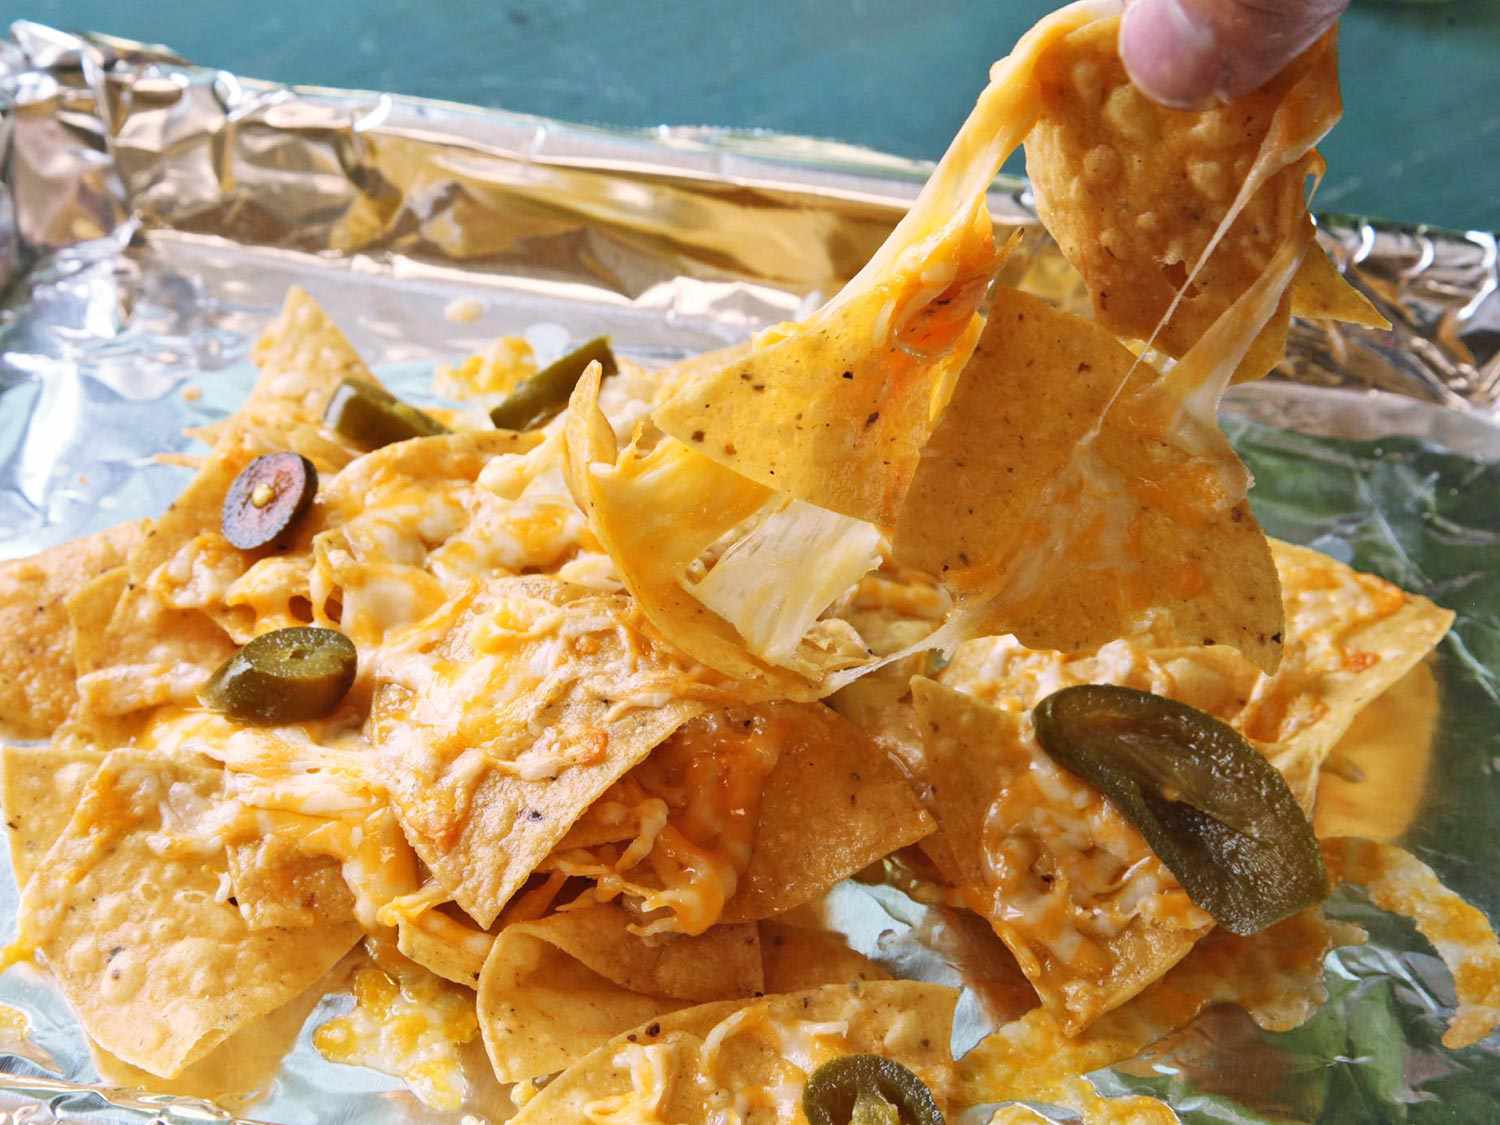 A cheese-encrusted chip is removed from a sheet pan of nachos, pulling several other chips with it.